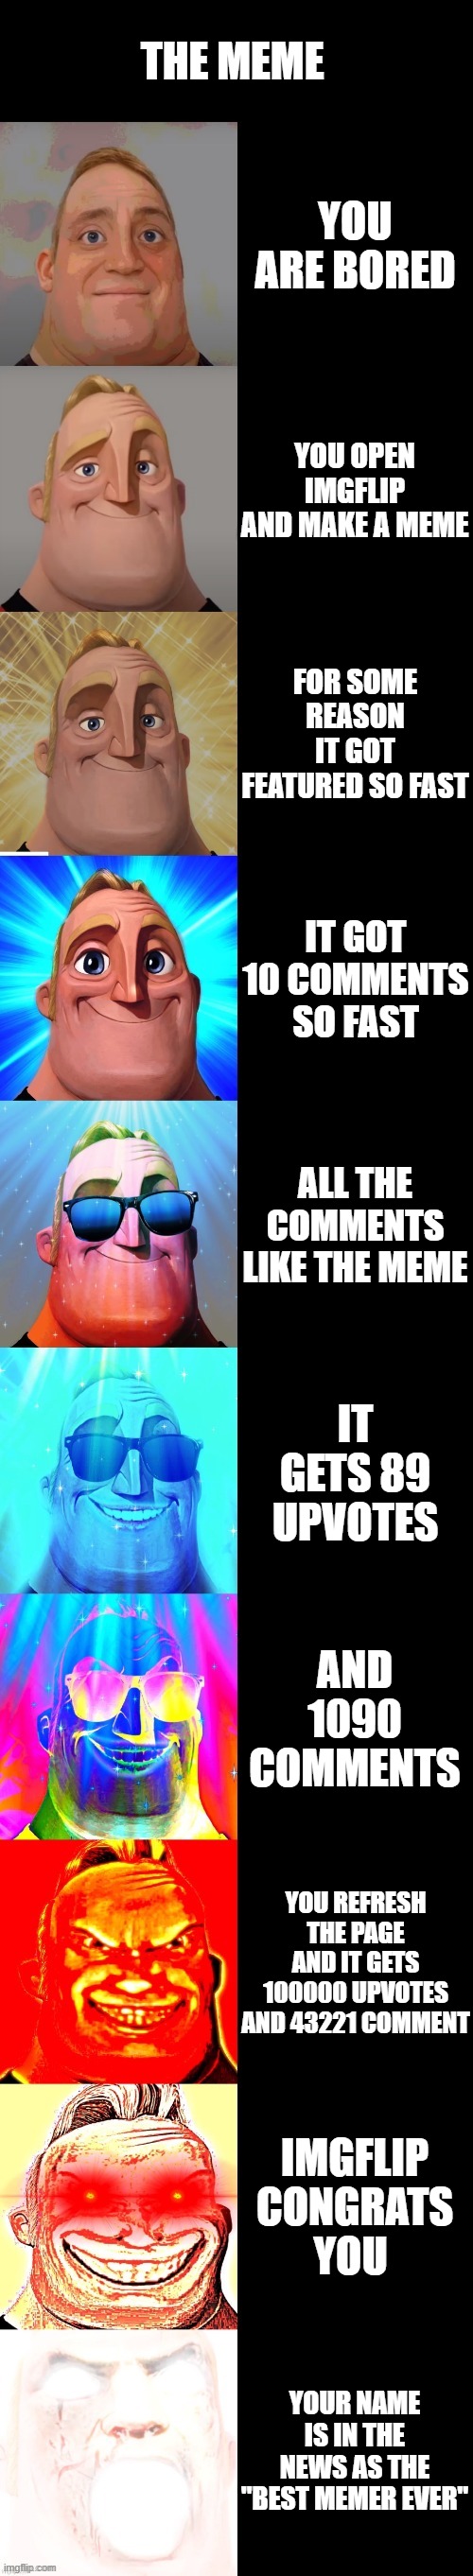 imagine if this happens to this meme |  THE MEME; YOU ARE BORED; YOU OPEN IMGFLIP AND MAKE A MEME; FOR SOME REASON IT GOT FEATURED SO FAST; IT GOT 10 COMMENTS SO FAST; ALL THE COMMENTS LIKE THE MEME; IT GETS 89 UPVOTES; AND 1090 COMMENTS; YOU REFRESH THE PAGE AND IT GETS 100000 UPVOTES AND 43221 COMMENT; IMGFLIP CONGRATS YOU; YOUR NAME IS IN THE NEWS AS THE "BEST MEMER EVER" | image tagged in mr incredible becoming canny | made w/ Imgflip meme maker